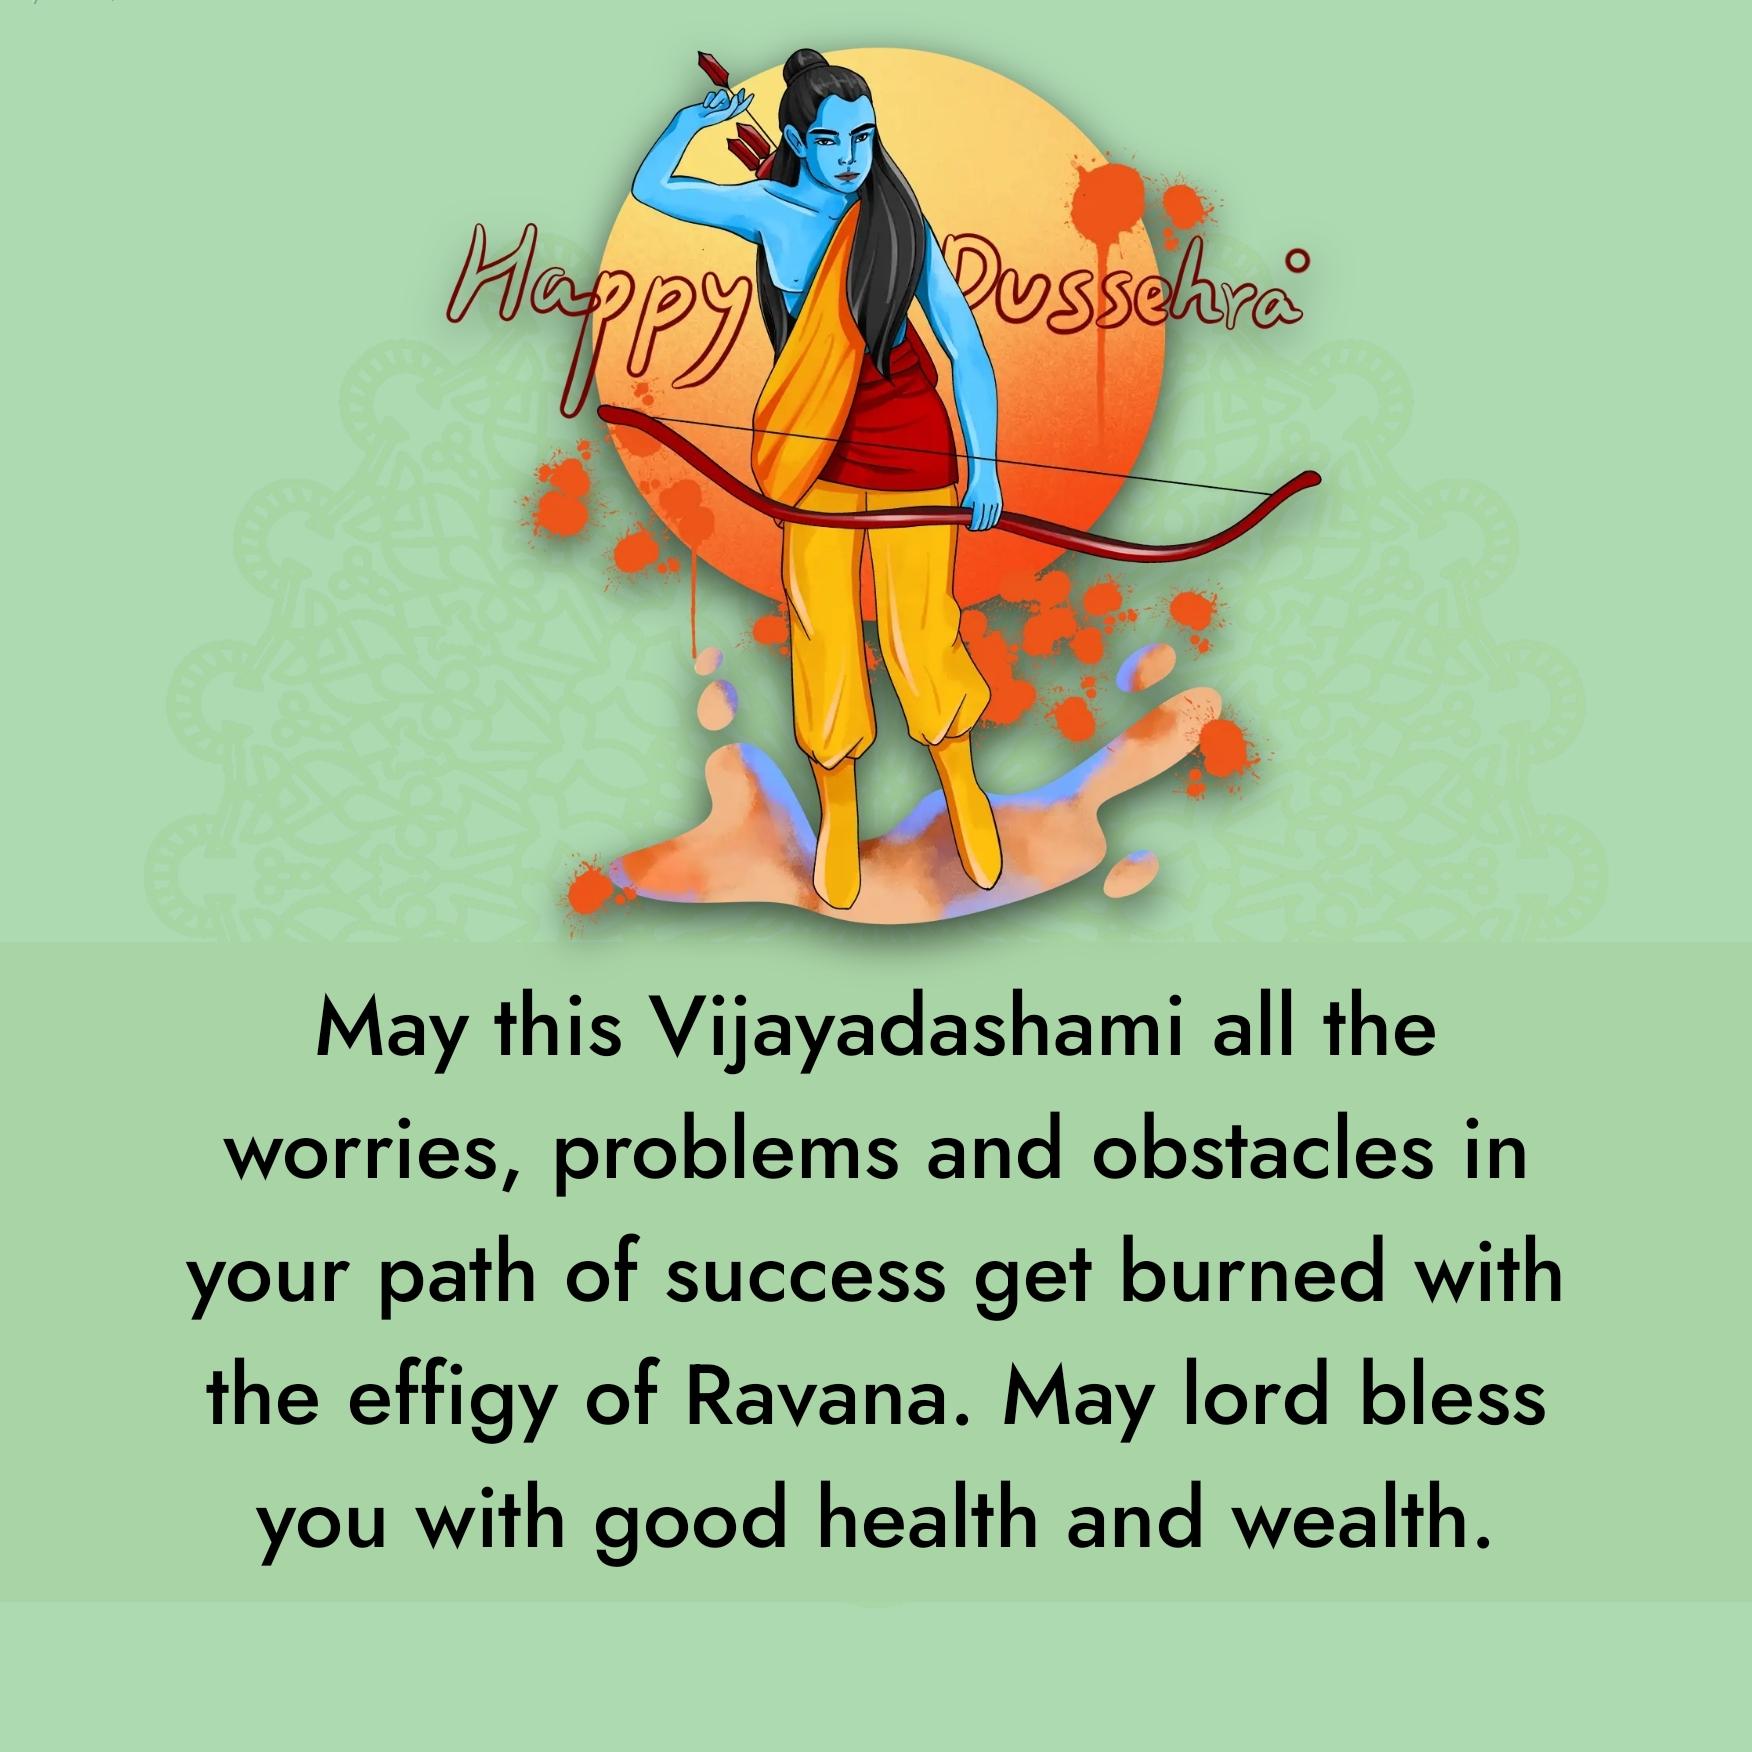 May this Vijayadashami all the worries problems and obstacles